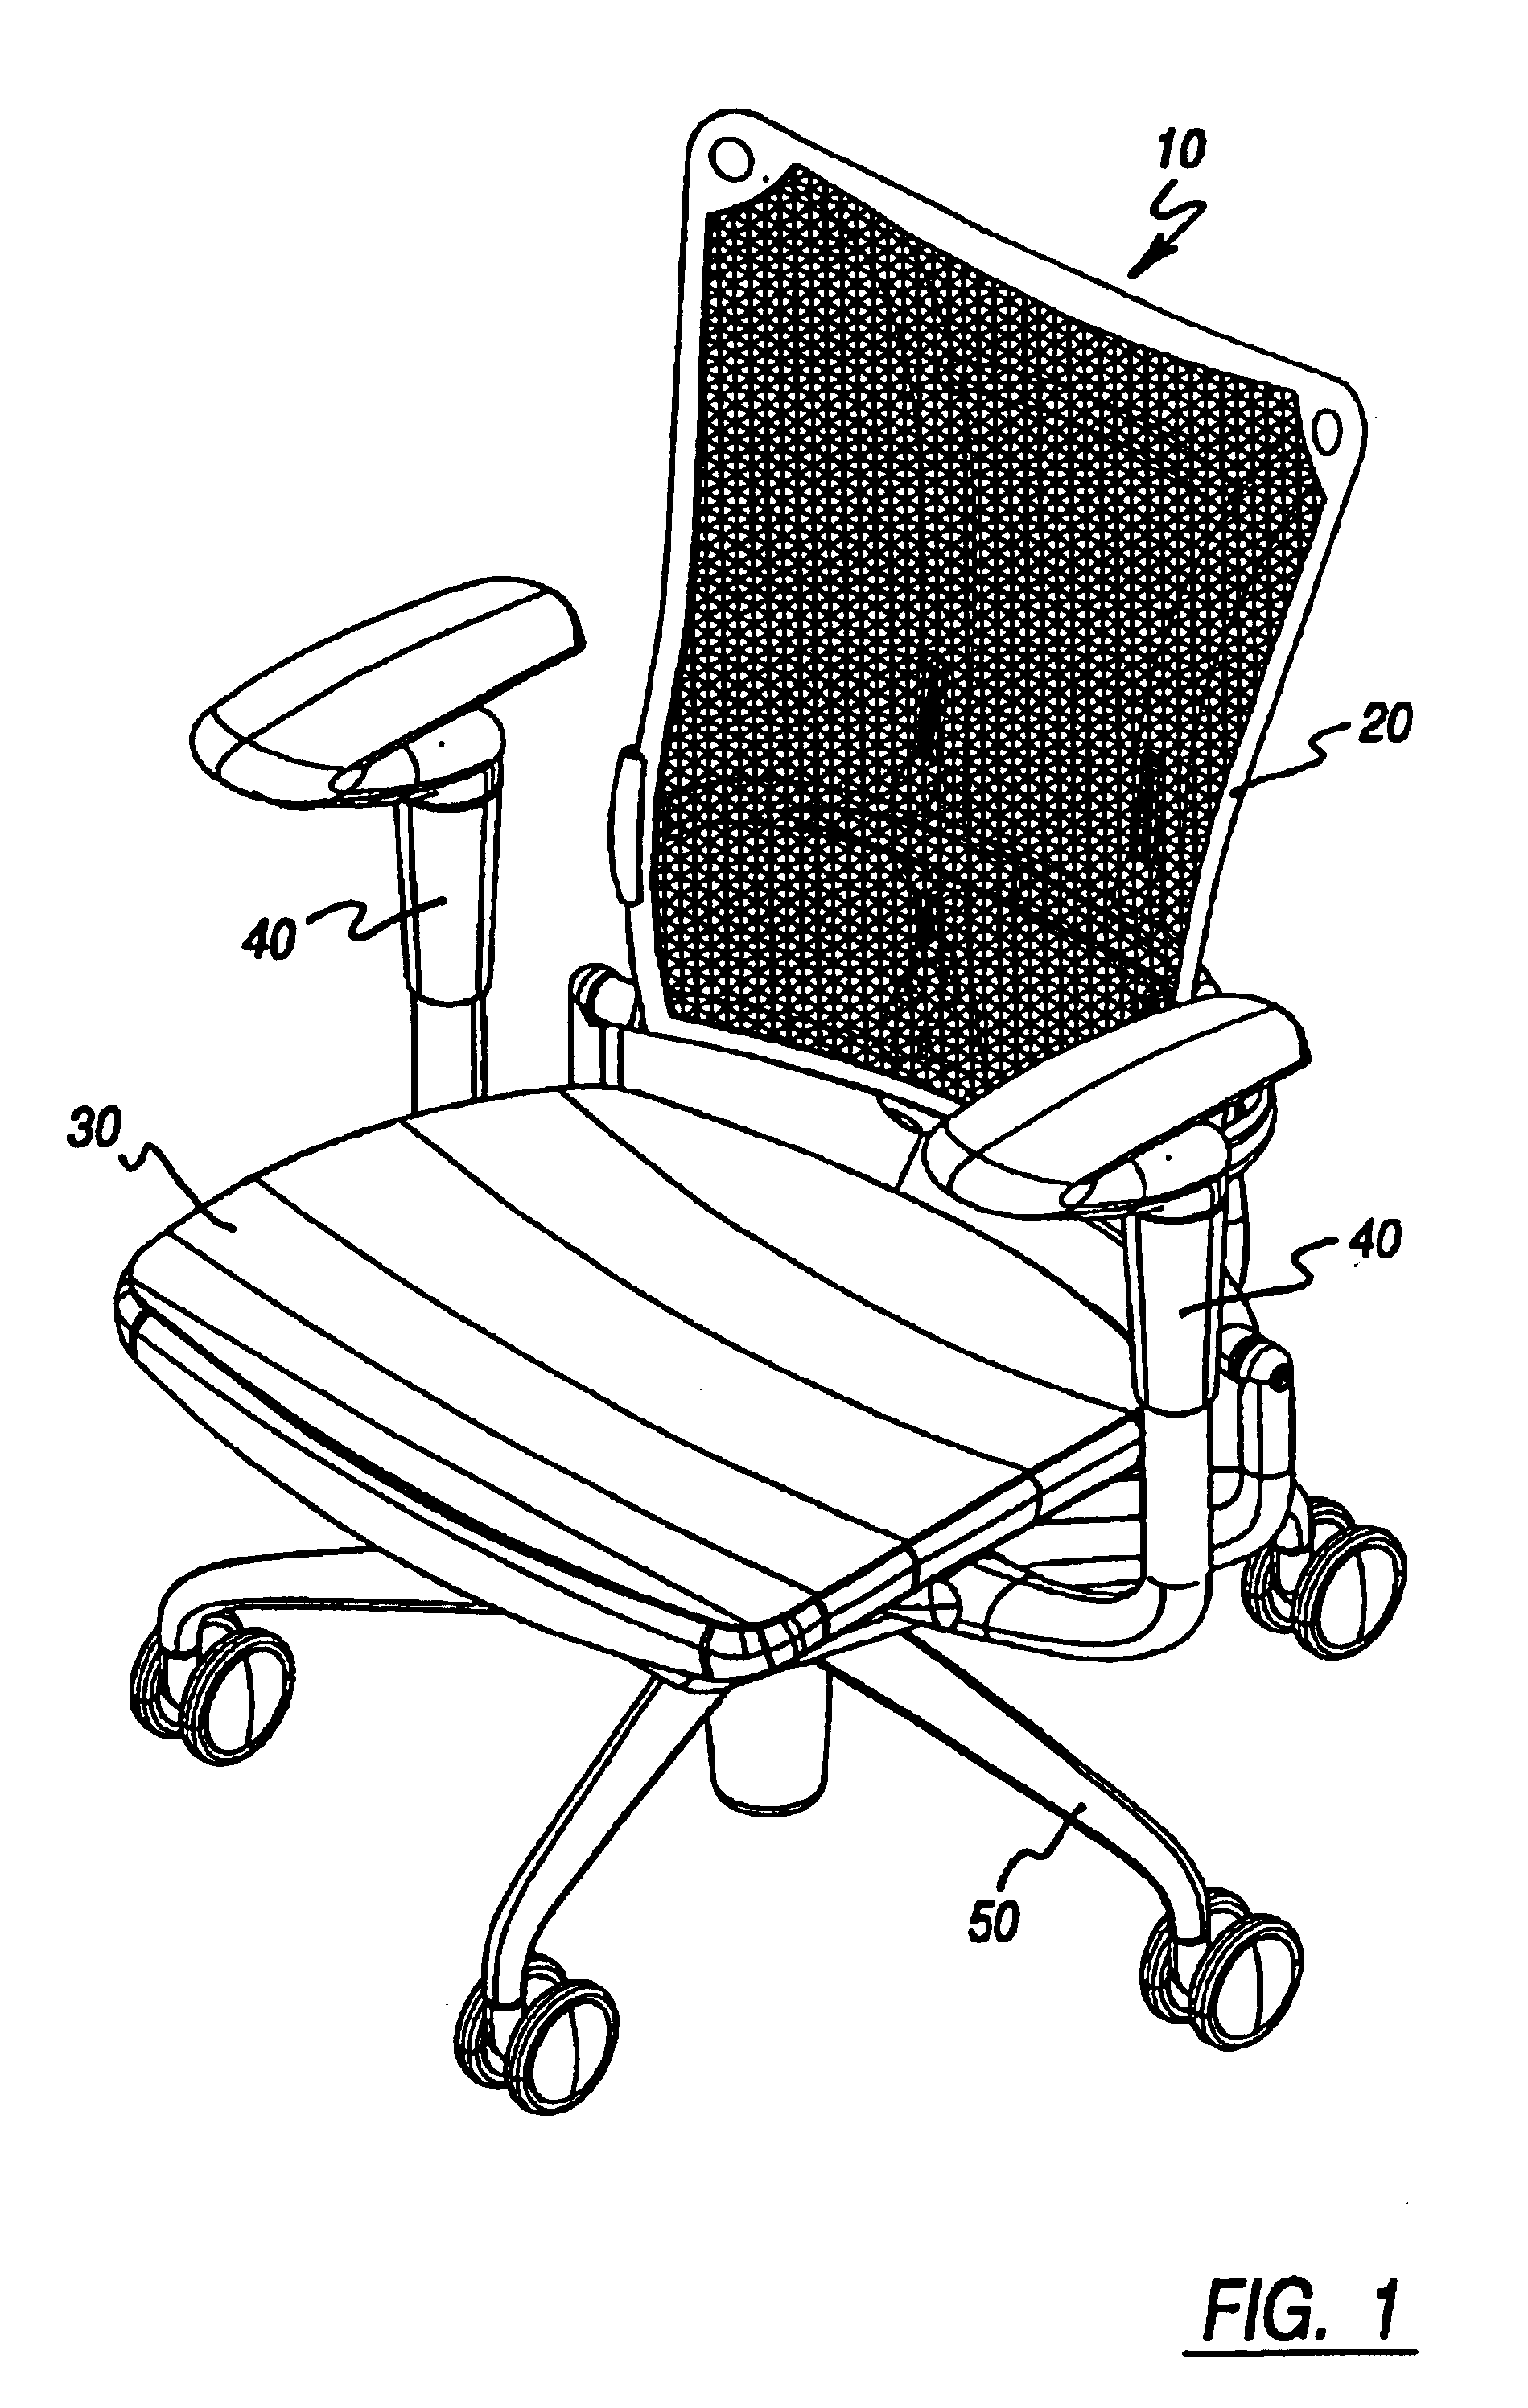 Vertically and horizontally adjustable chair armrest